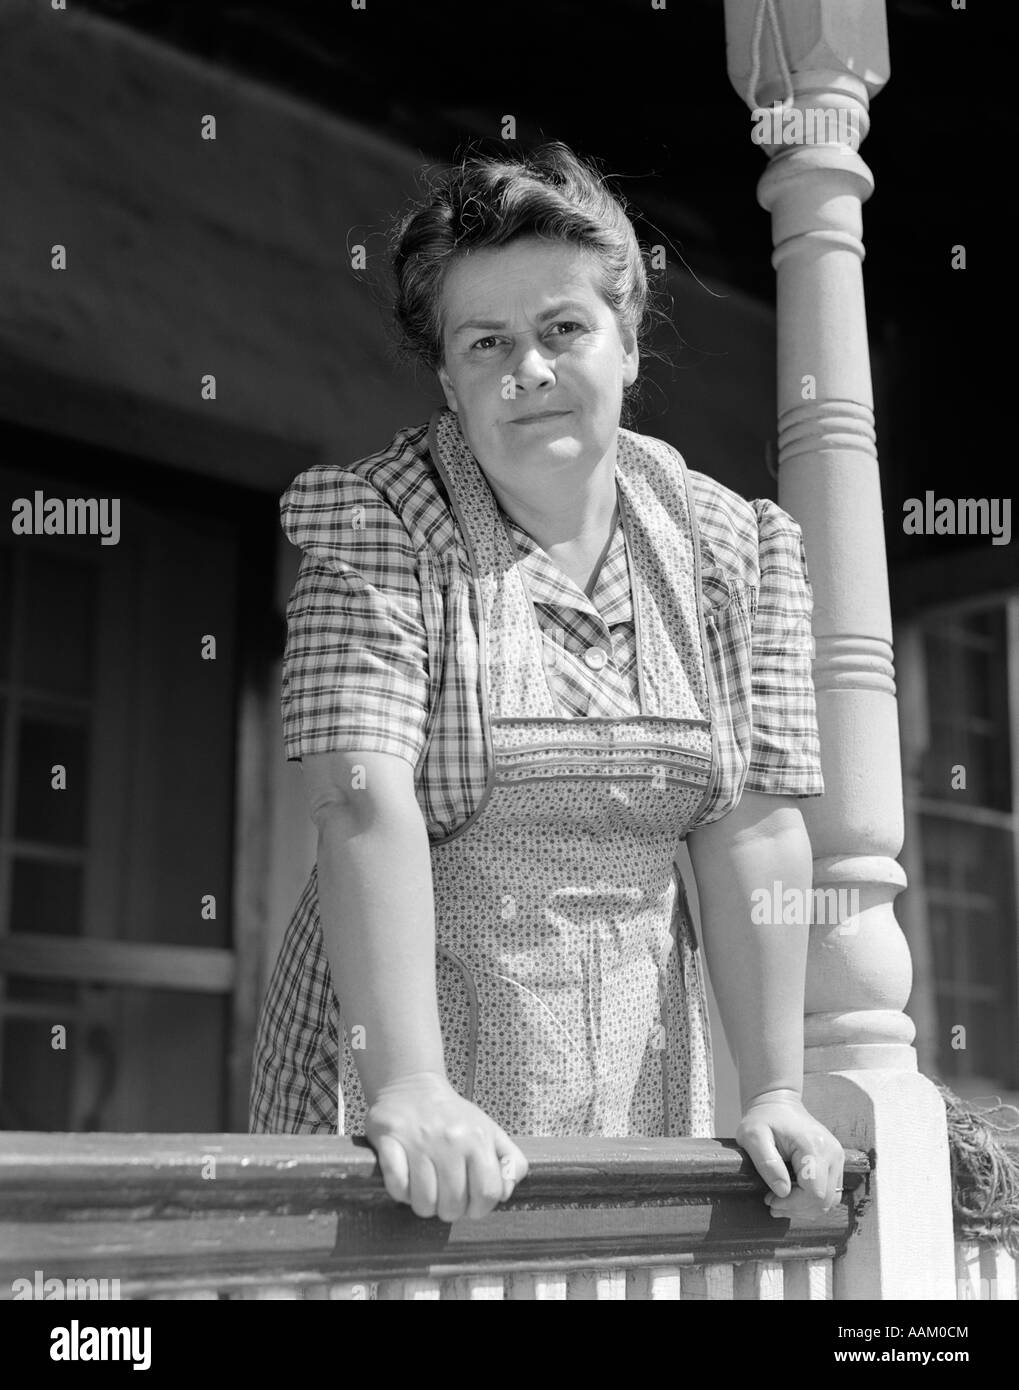 1940s OLDER WOMAN IN PLAID DRESS & APRON LEANING ON PORCH RAILING OF FARMHOUSE LOOKING AT CAMERA Stock Photo